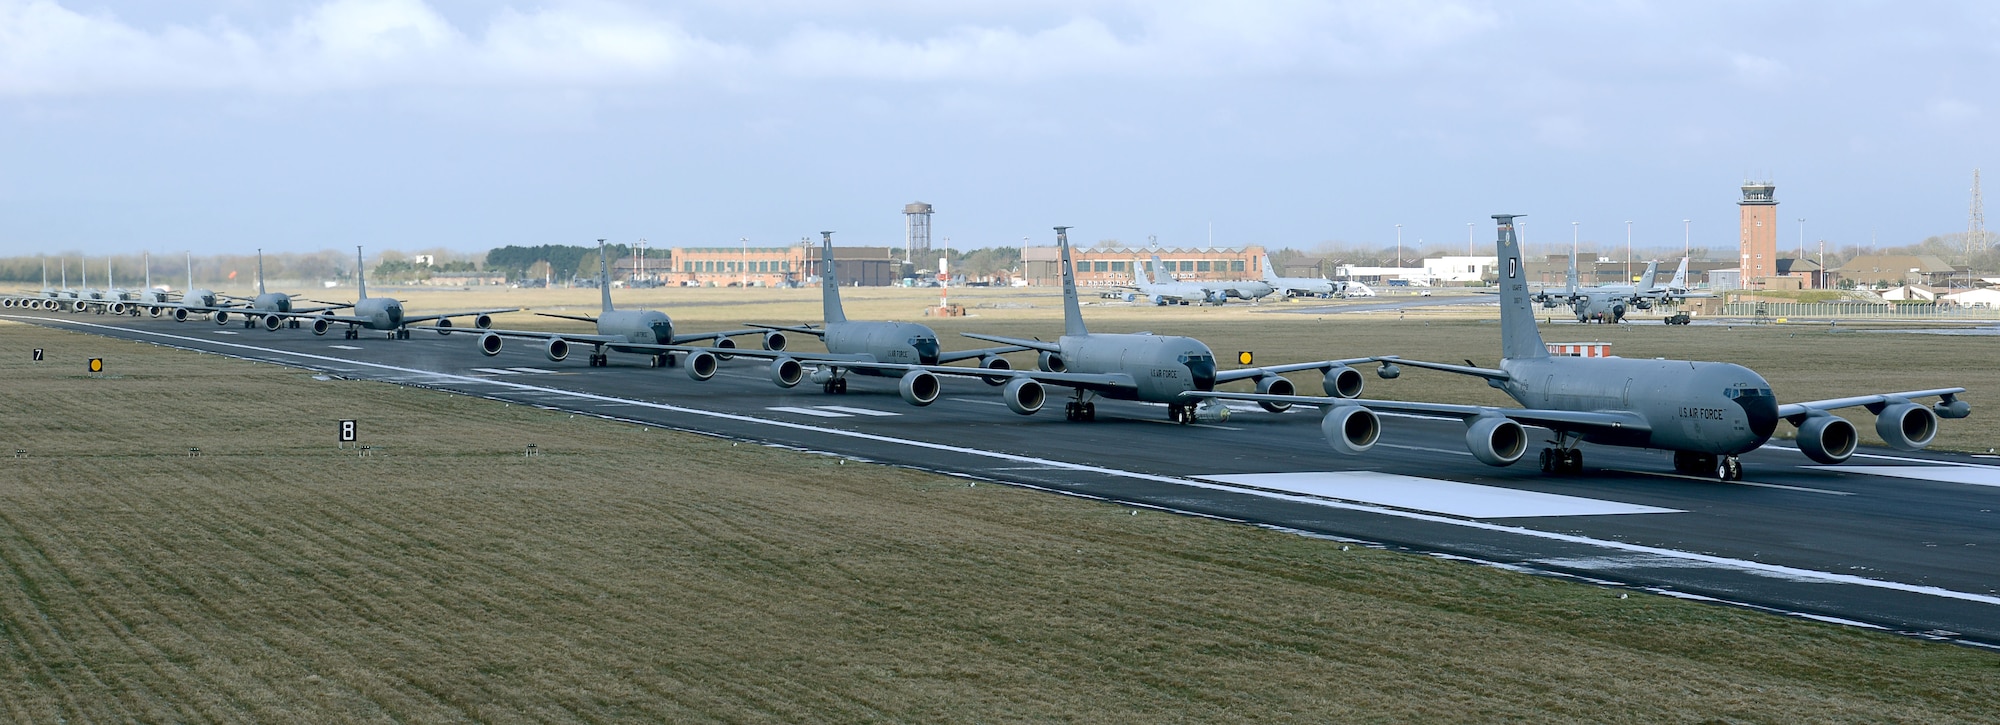 Twelve U.S. Air Force KC-135 Stratotankers assigned to the 100th Air Refueling Wing taxi down the runway at RAF Mildenhall, England, Feb. 27, 2018. The show of force maneuver demonstrates the readiness of the wing to provide global air refueling support at short notice. (U.S. Air Force photo by Senior Airman Justine Rho)